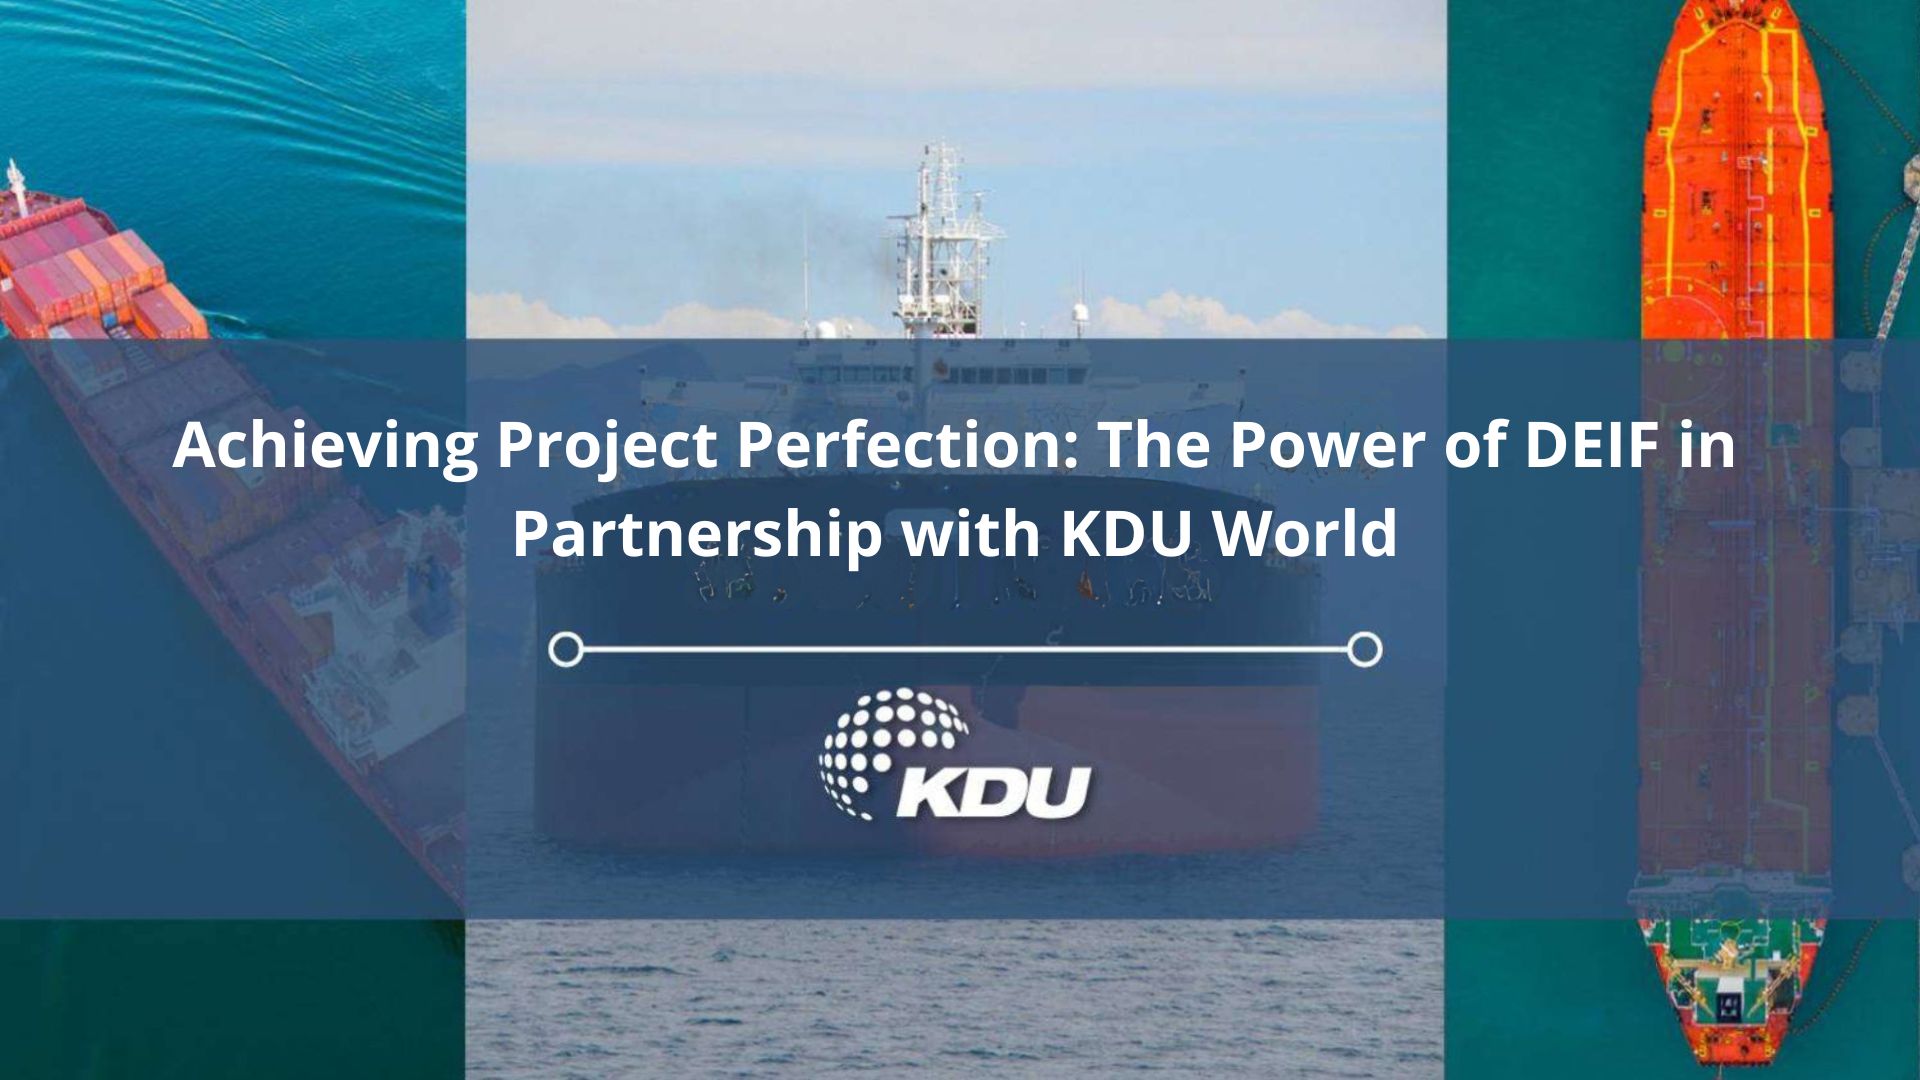 Achieving Project Perfection: The Power of DEIF in Partnership with KDU World